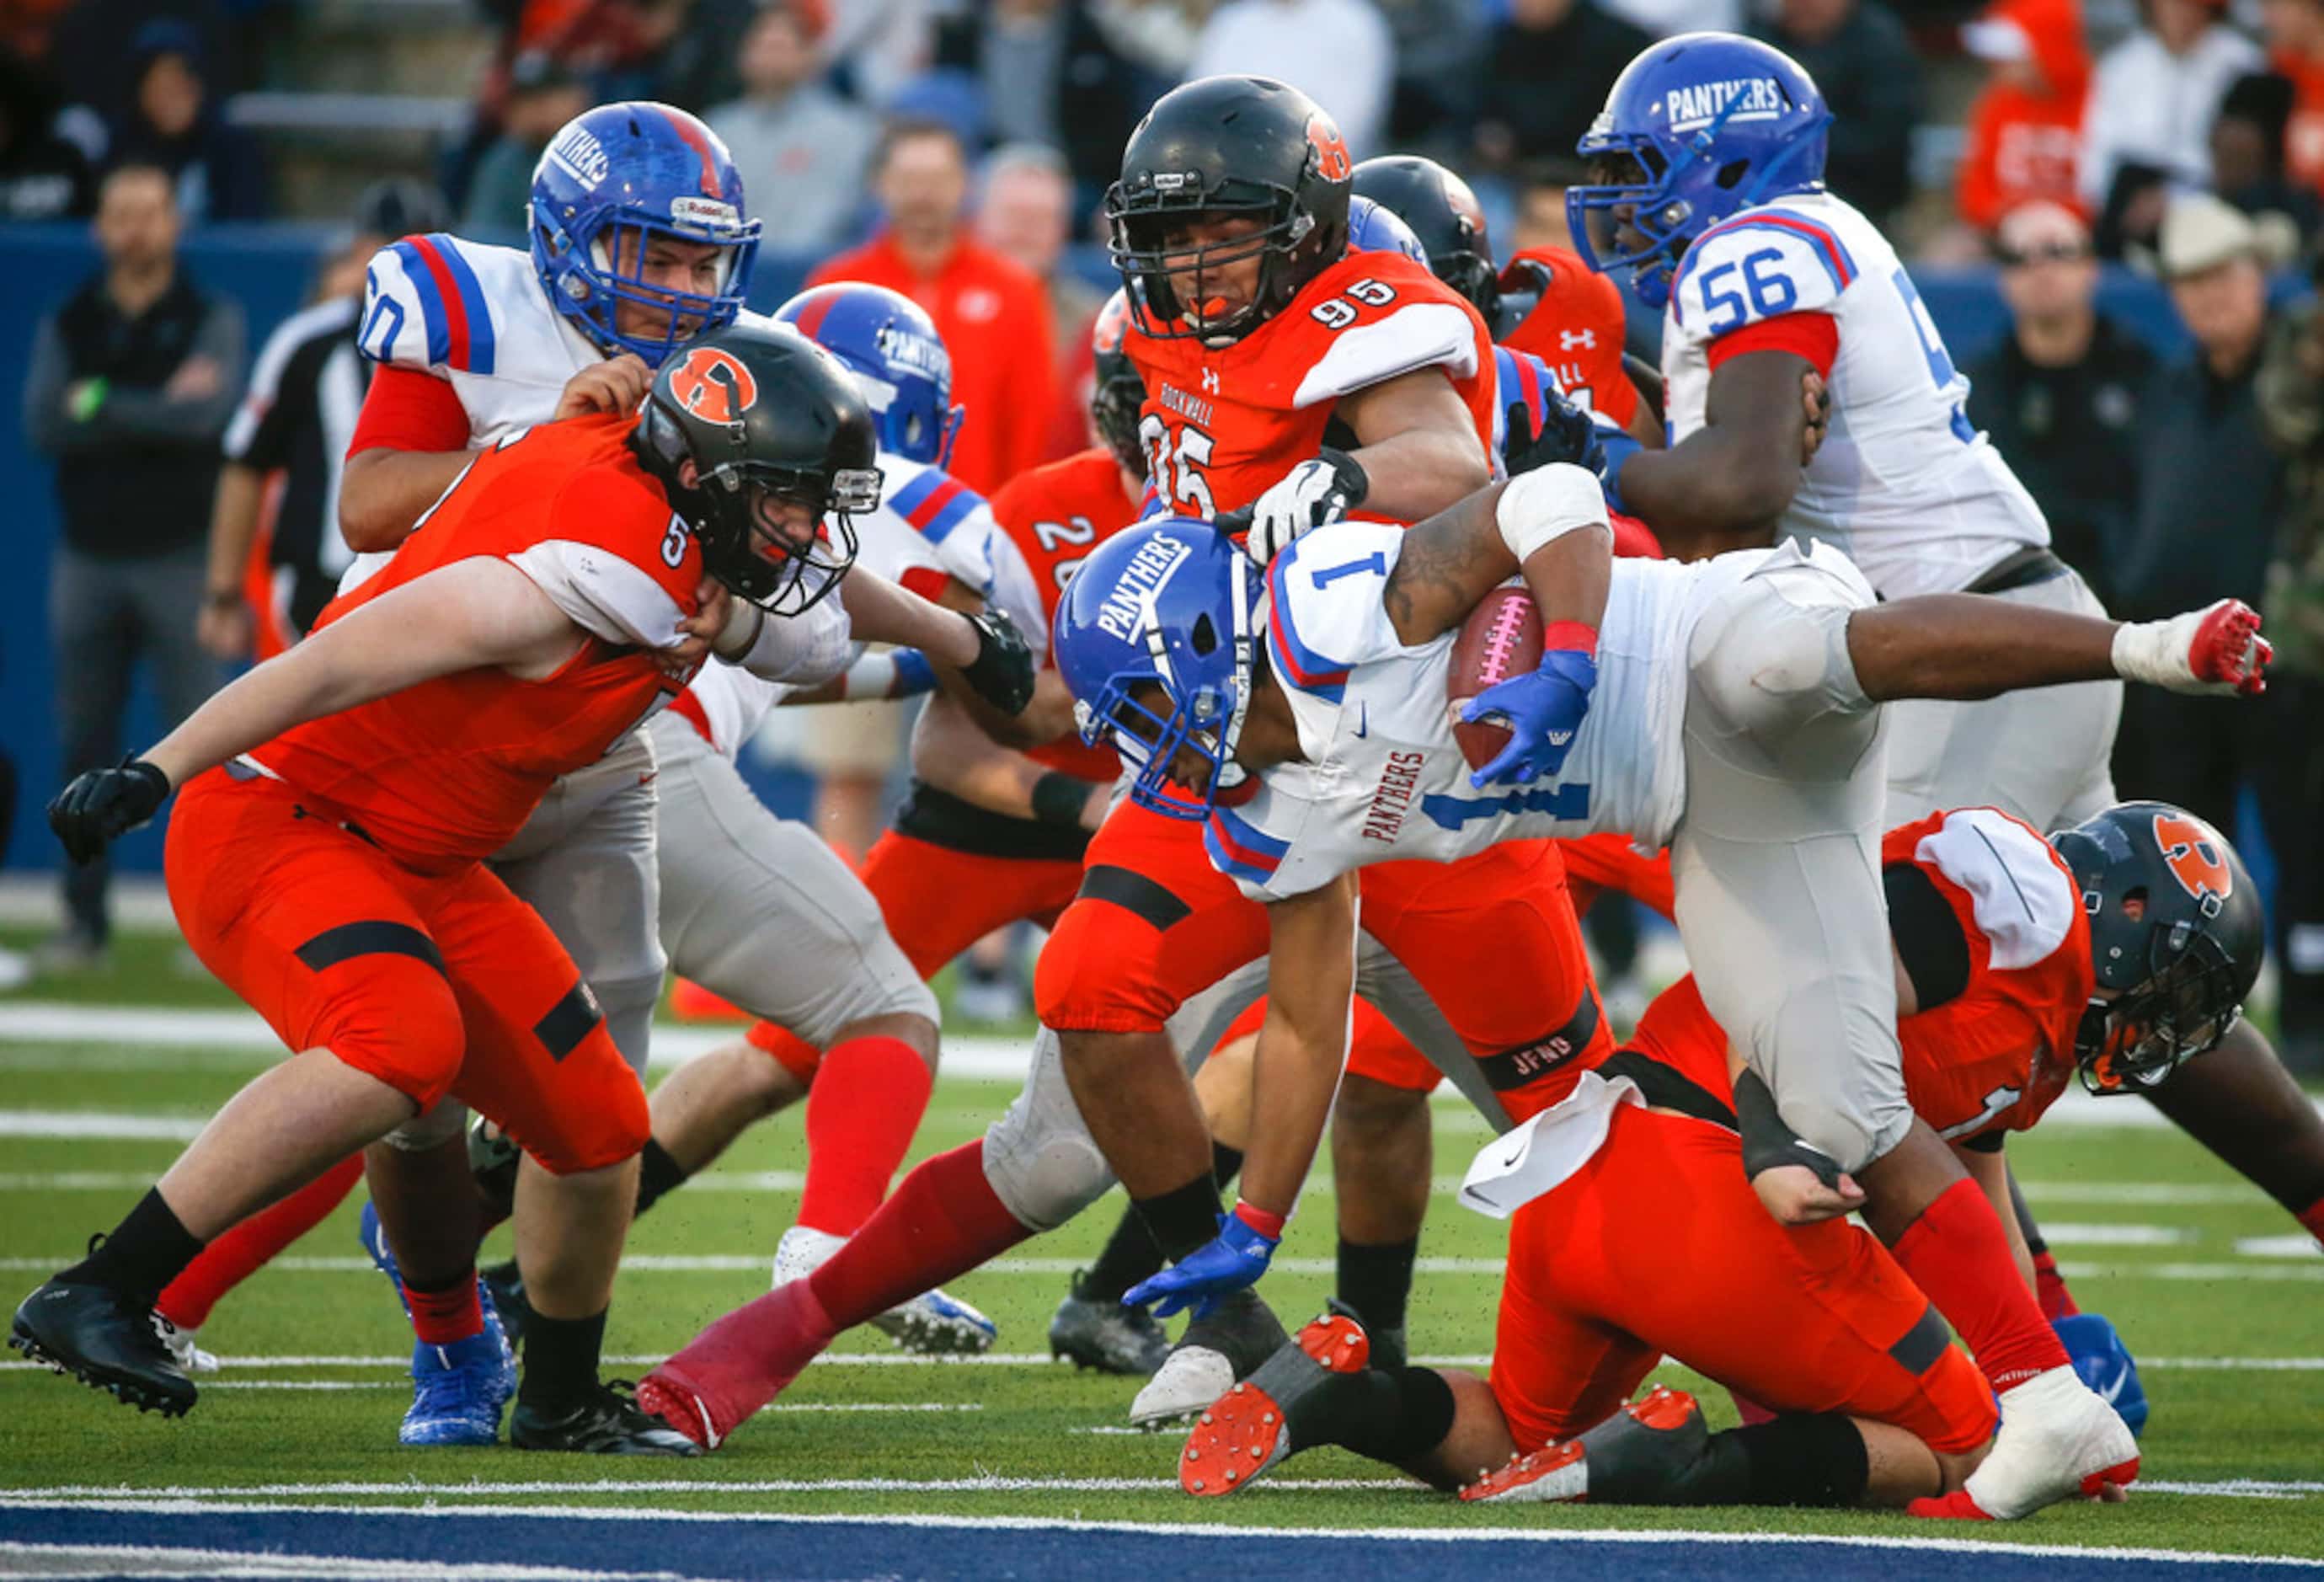 Duncanville running back Trysten Smith (1) is brought down by Rockwall to end a run during...